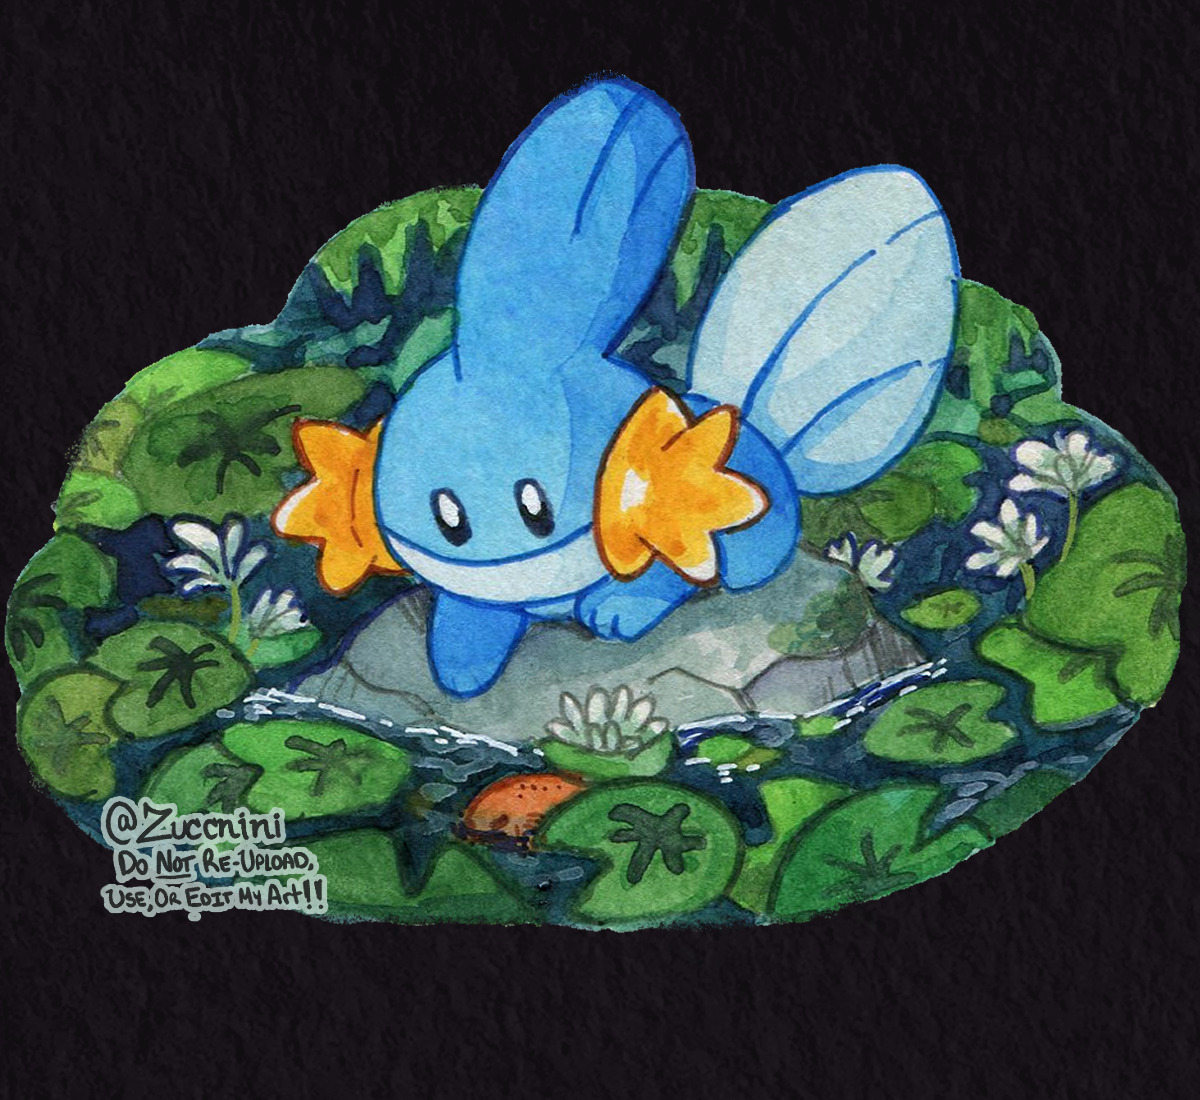 Mudkip
Stickers available here